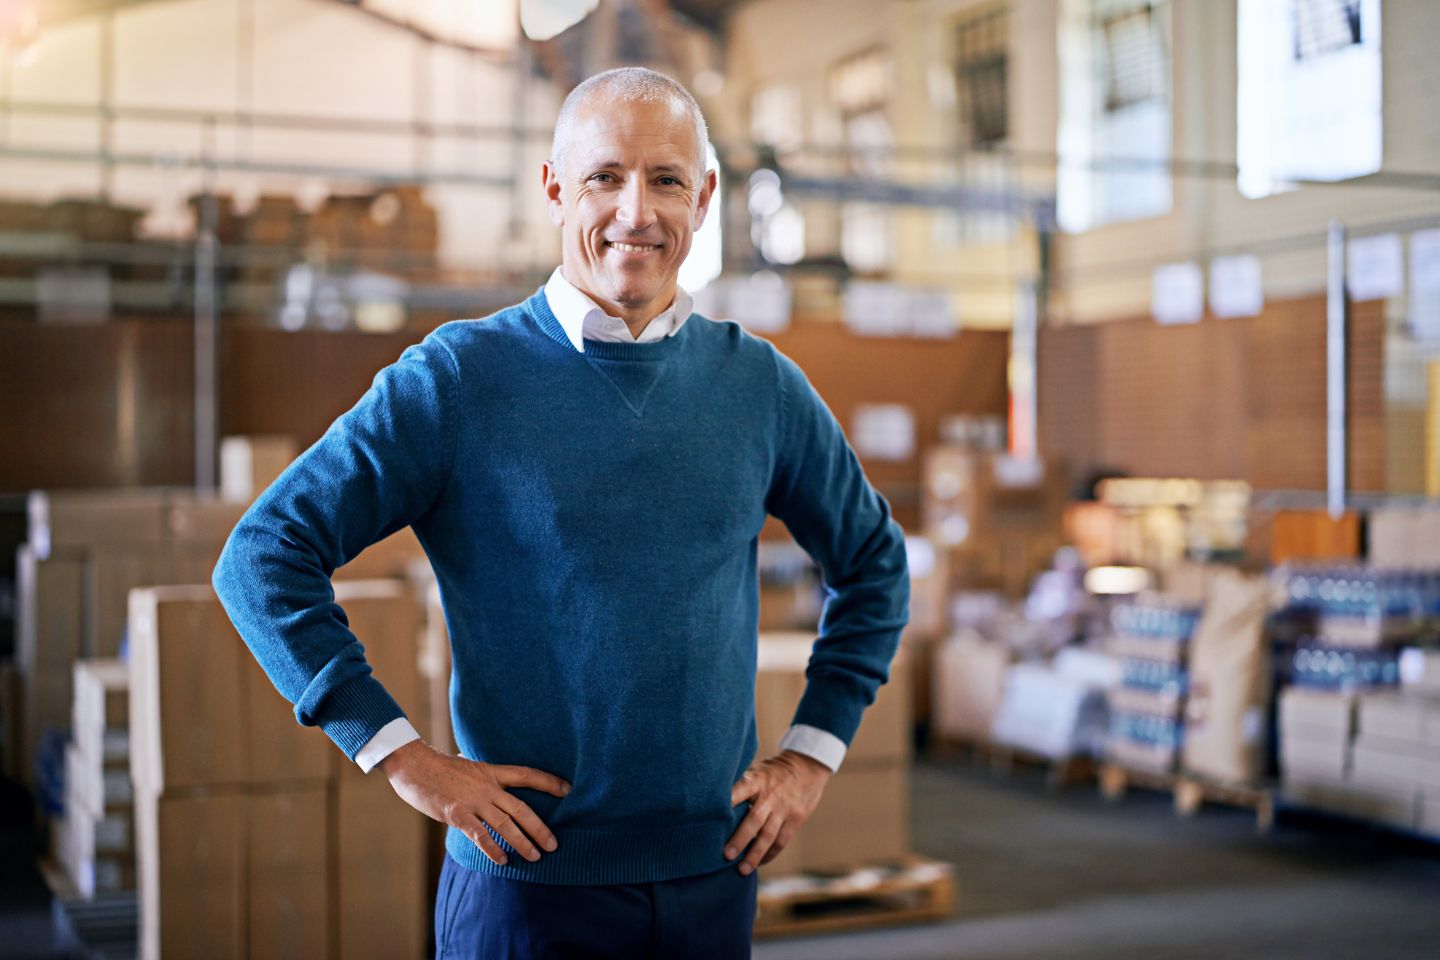 scalability-&-service-man-smiling-inside-warehouse-